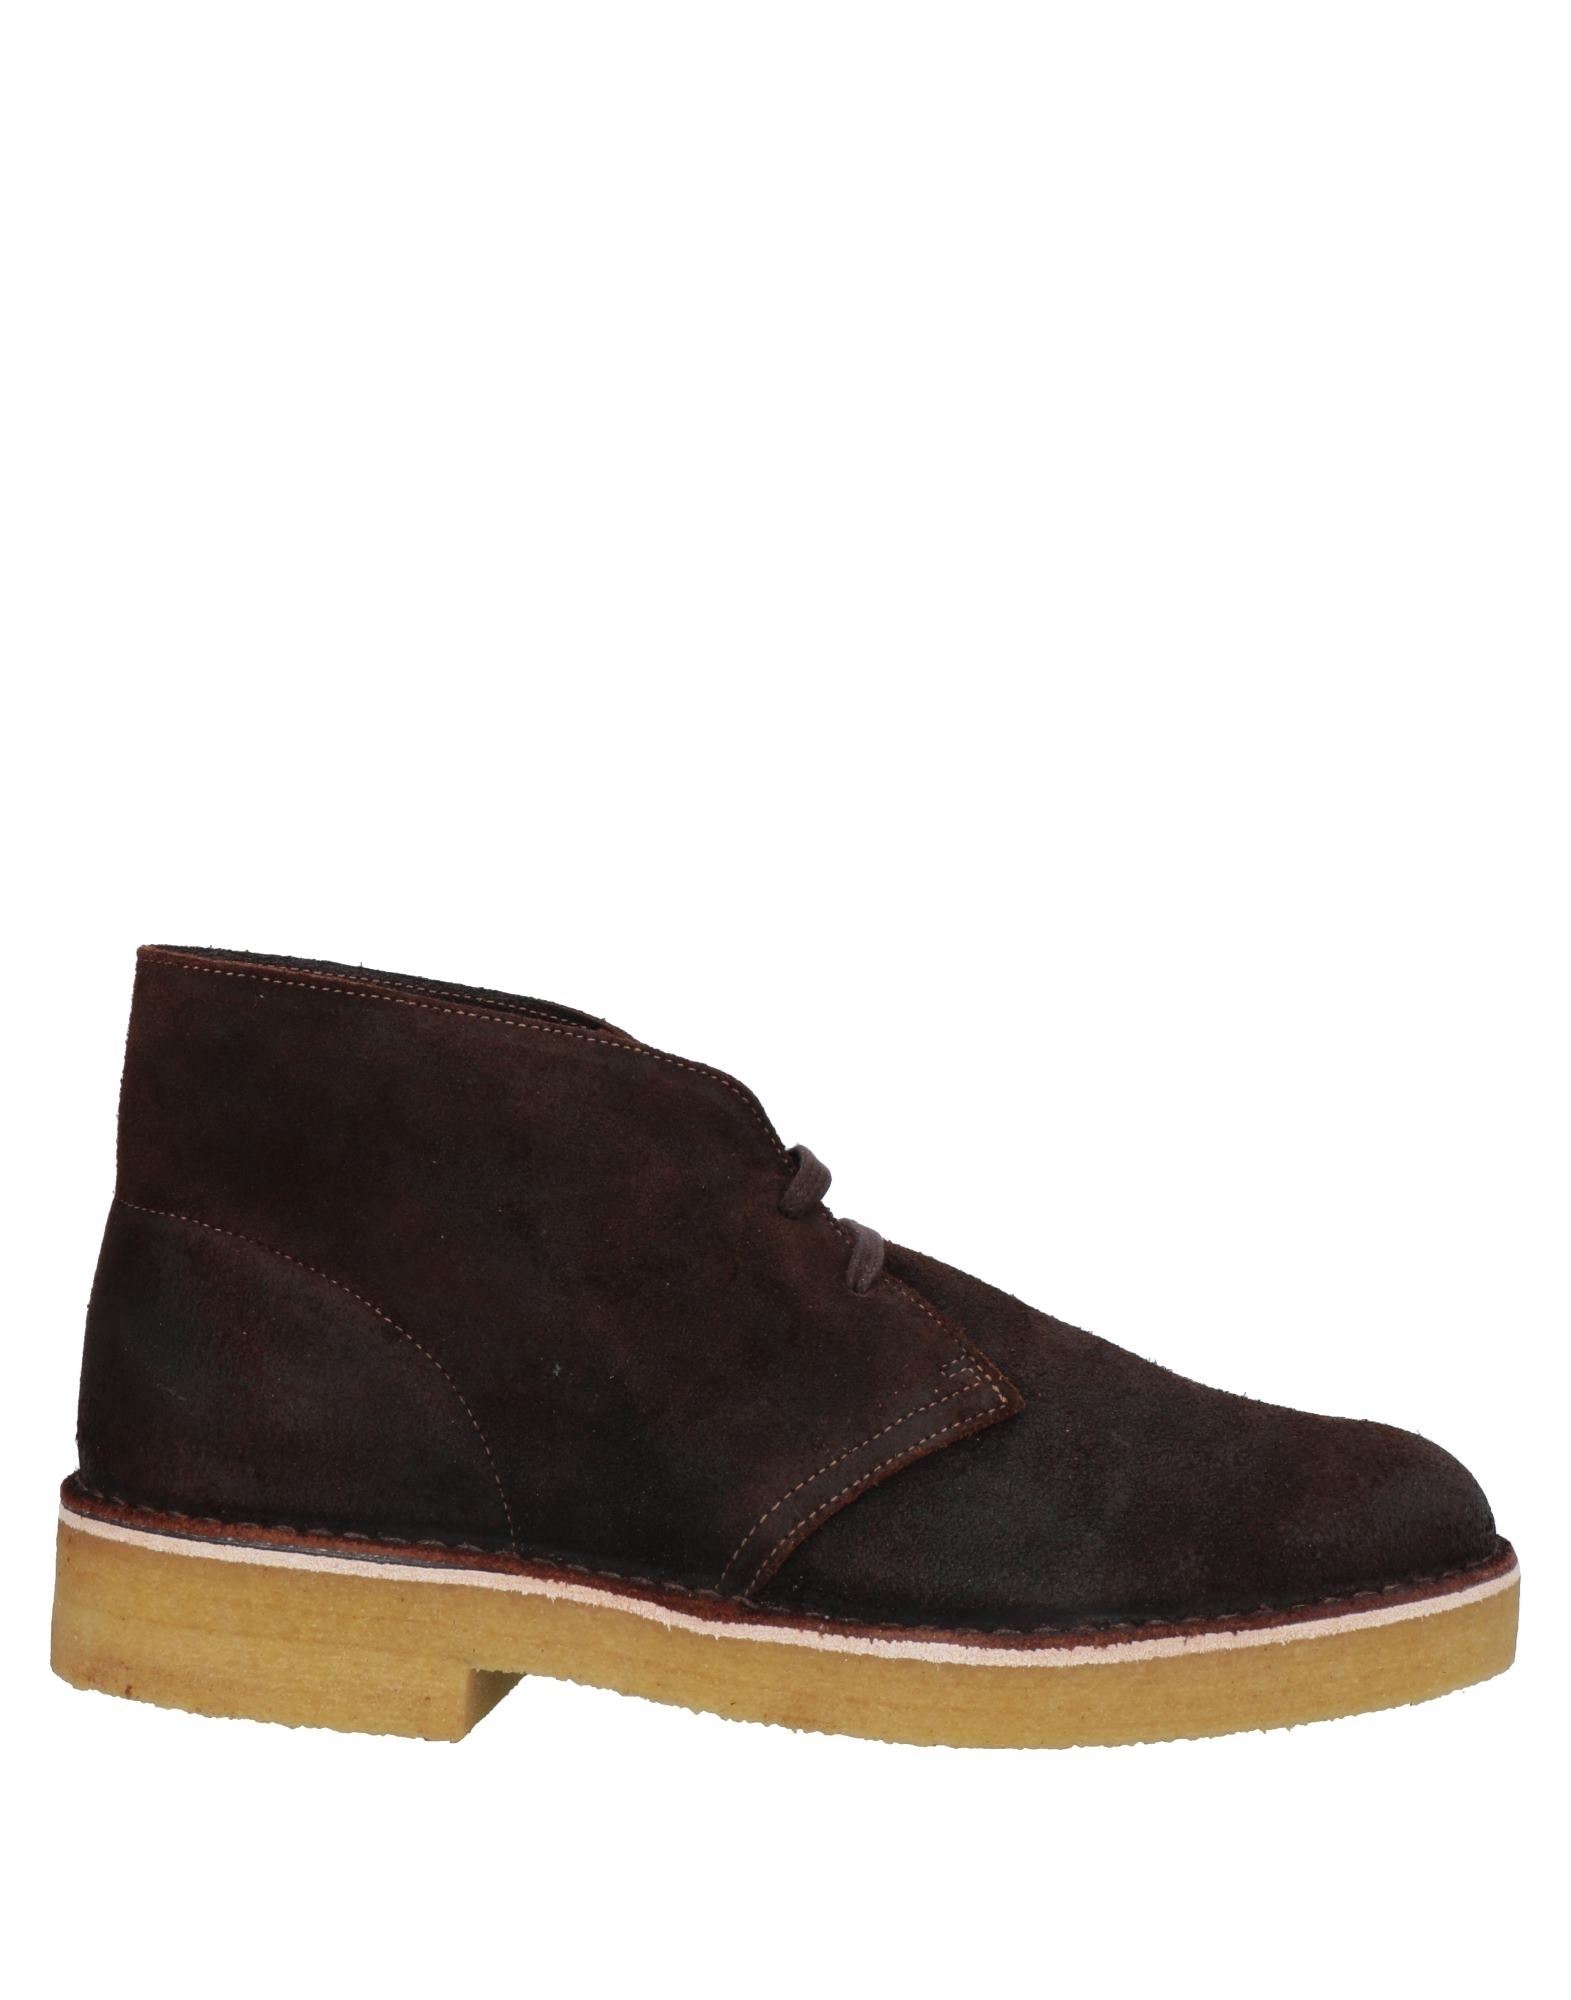 Clarks Originals Ankle Boots In Brown